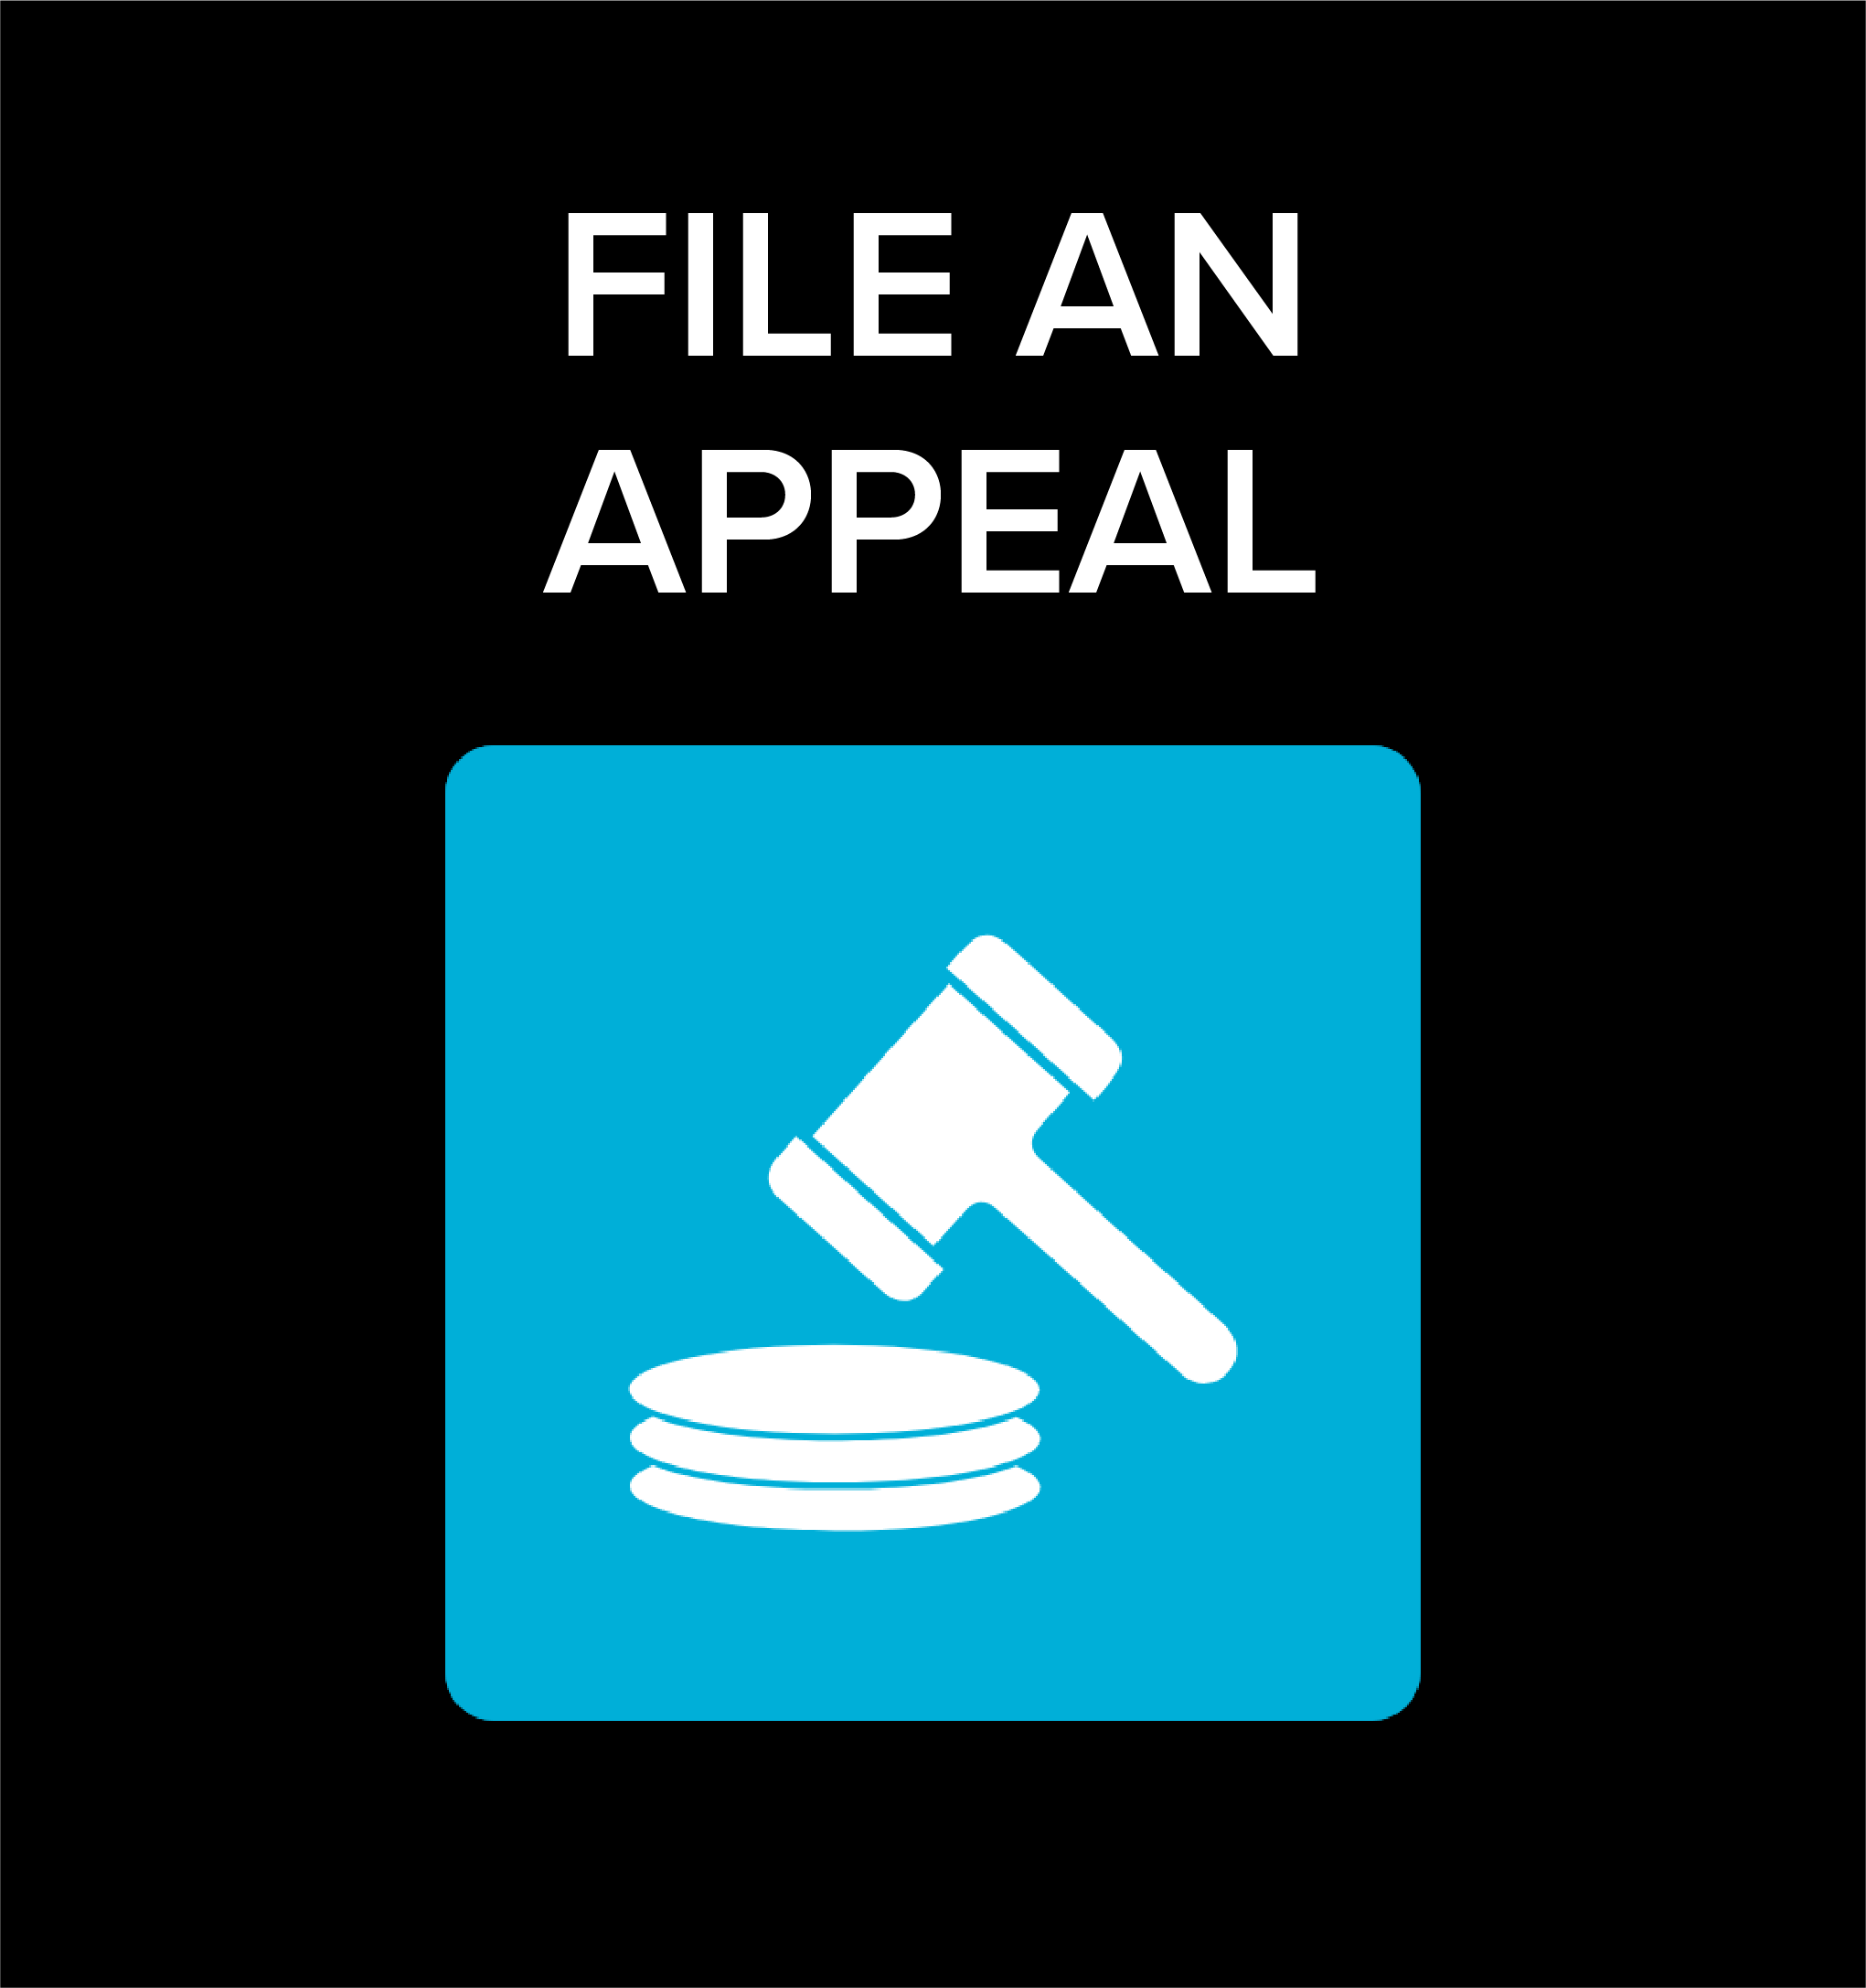 File an Appeal